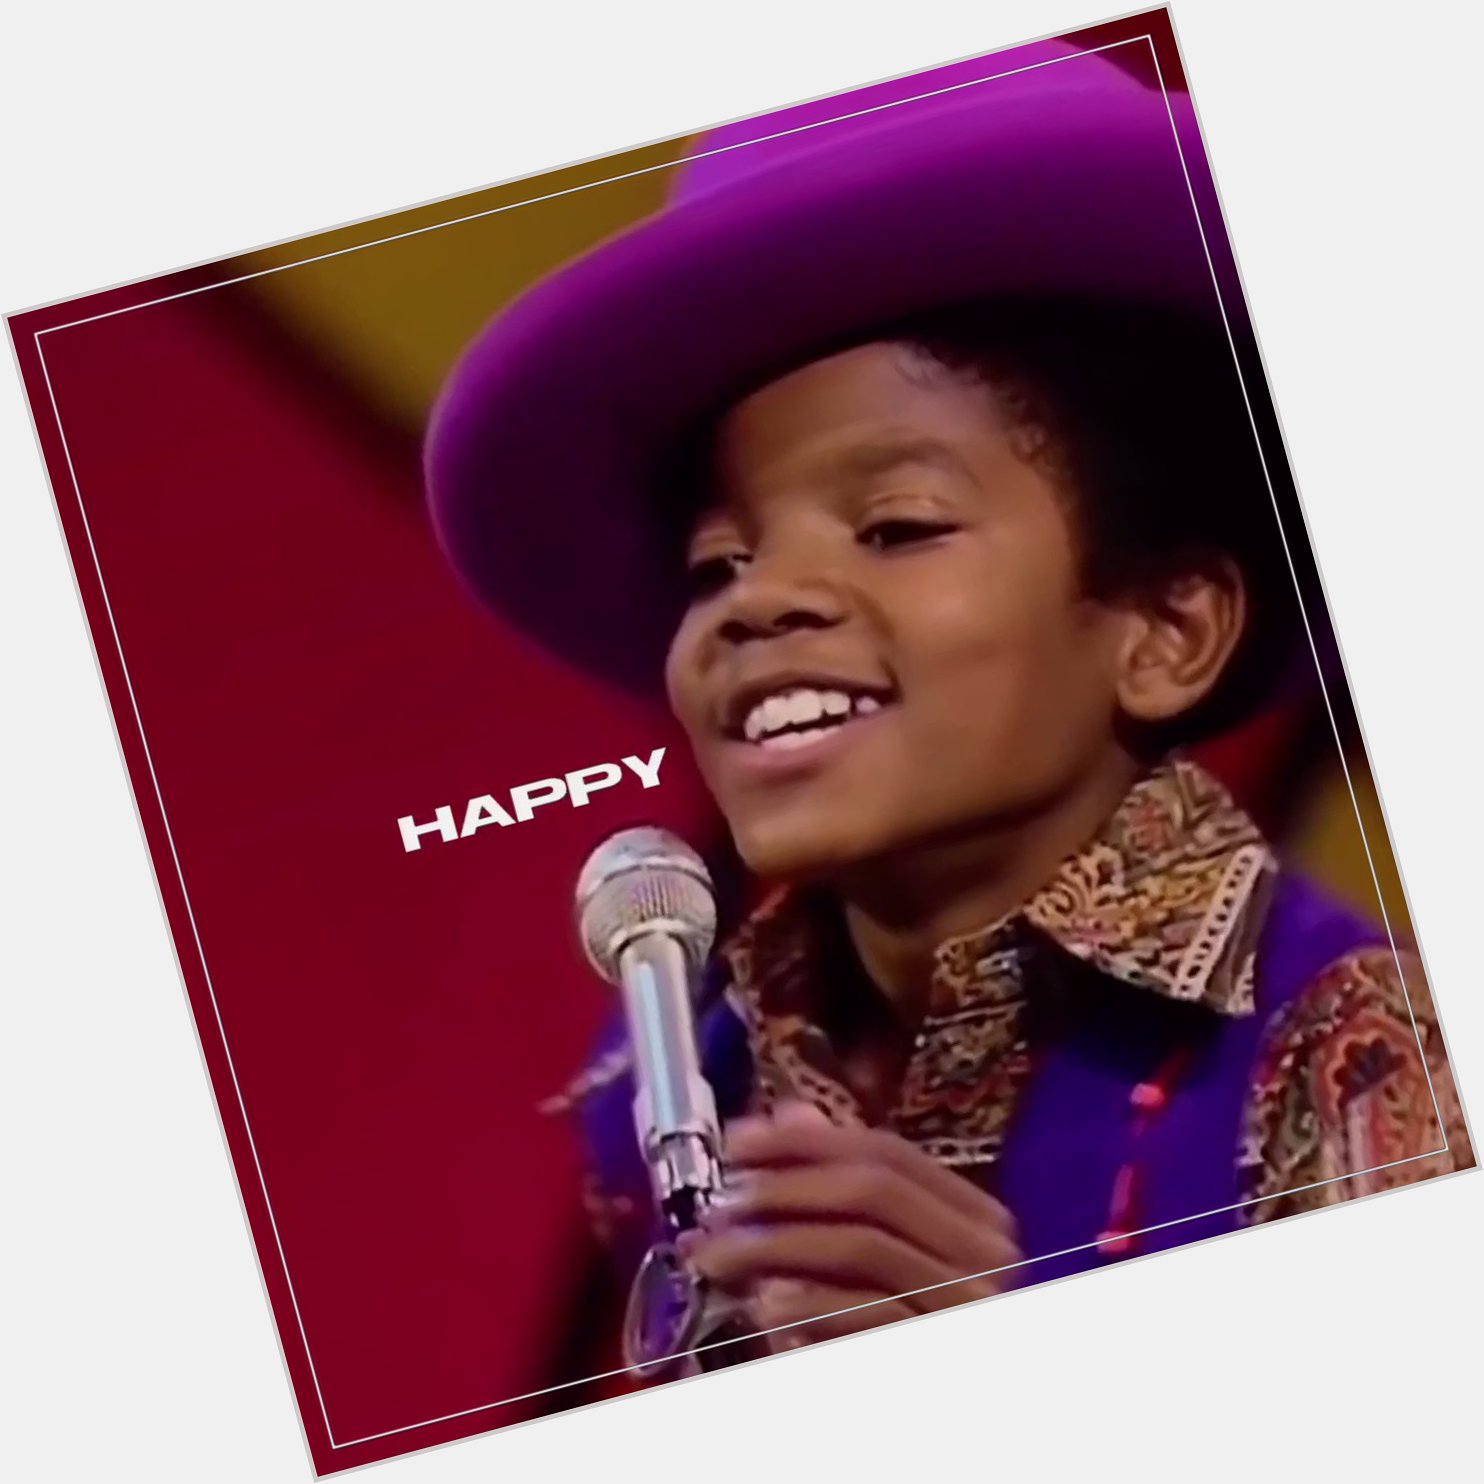 A legend with the most beautiful smile in the world, happy heavenly birthday michael jackson  